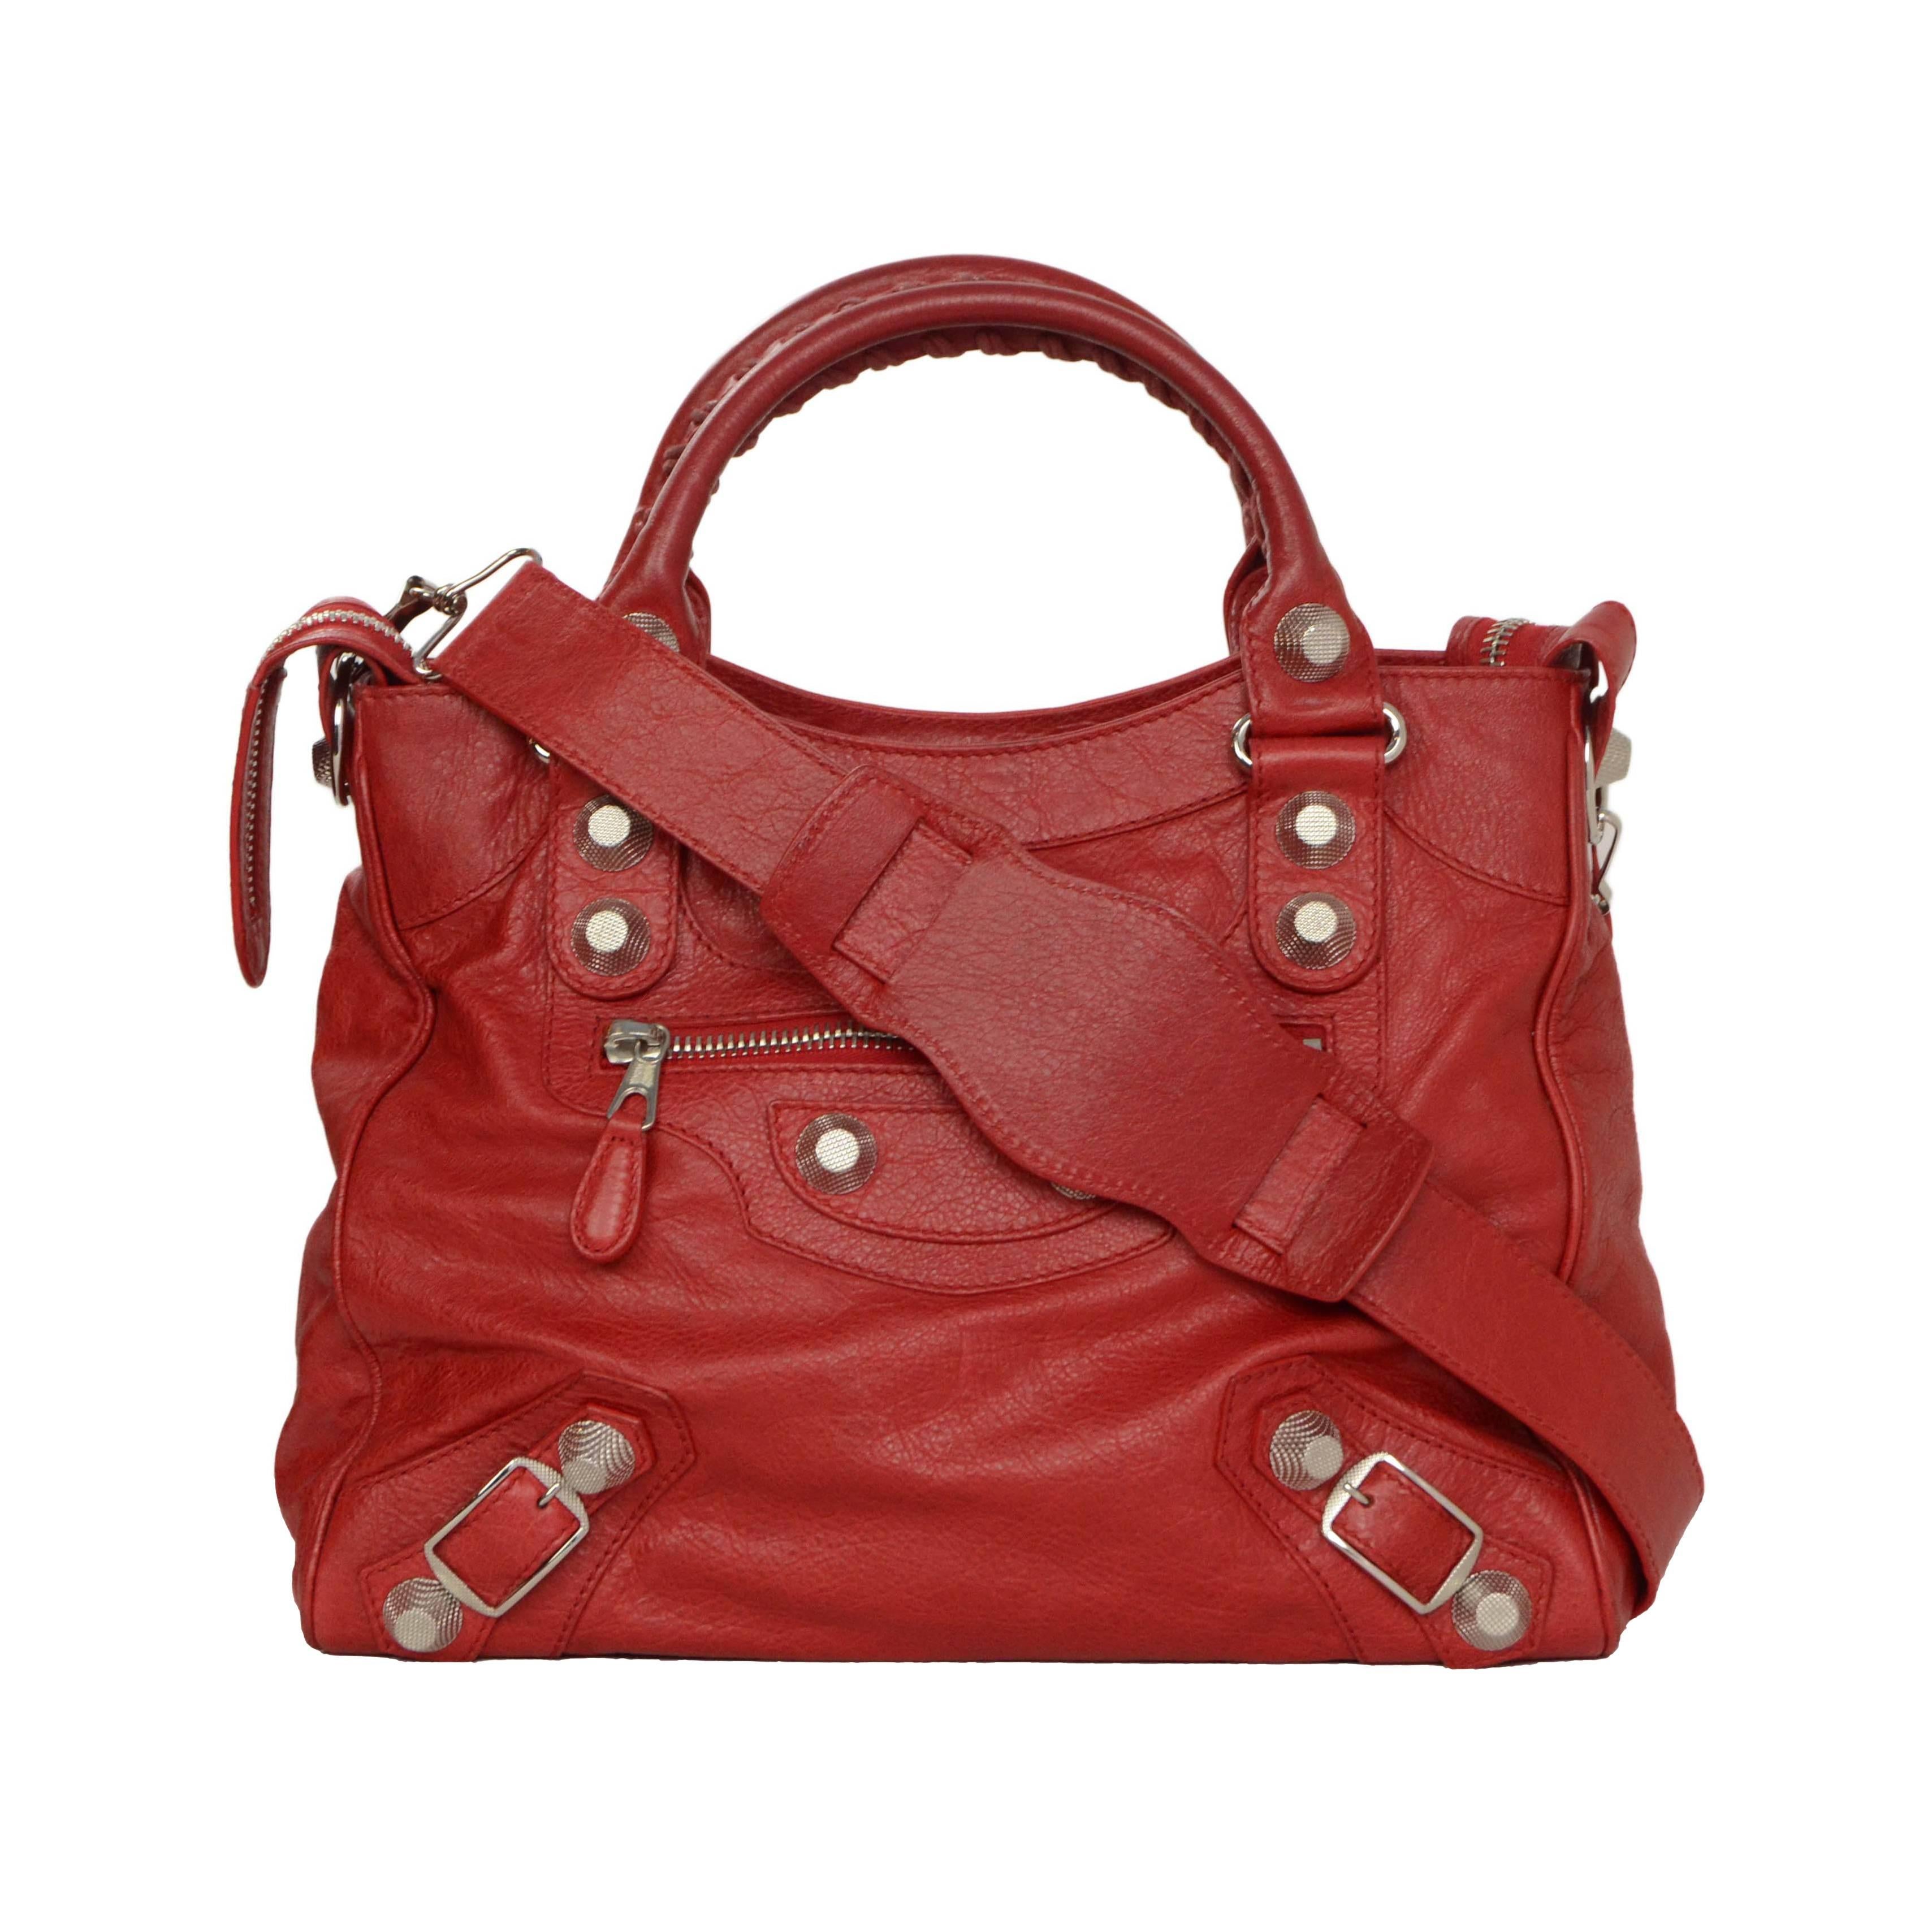 Balenciaga Red Distressed Leather Giant 21 Velo Bag SHW